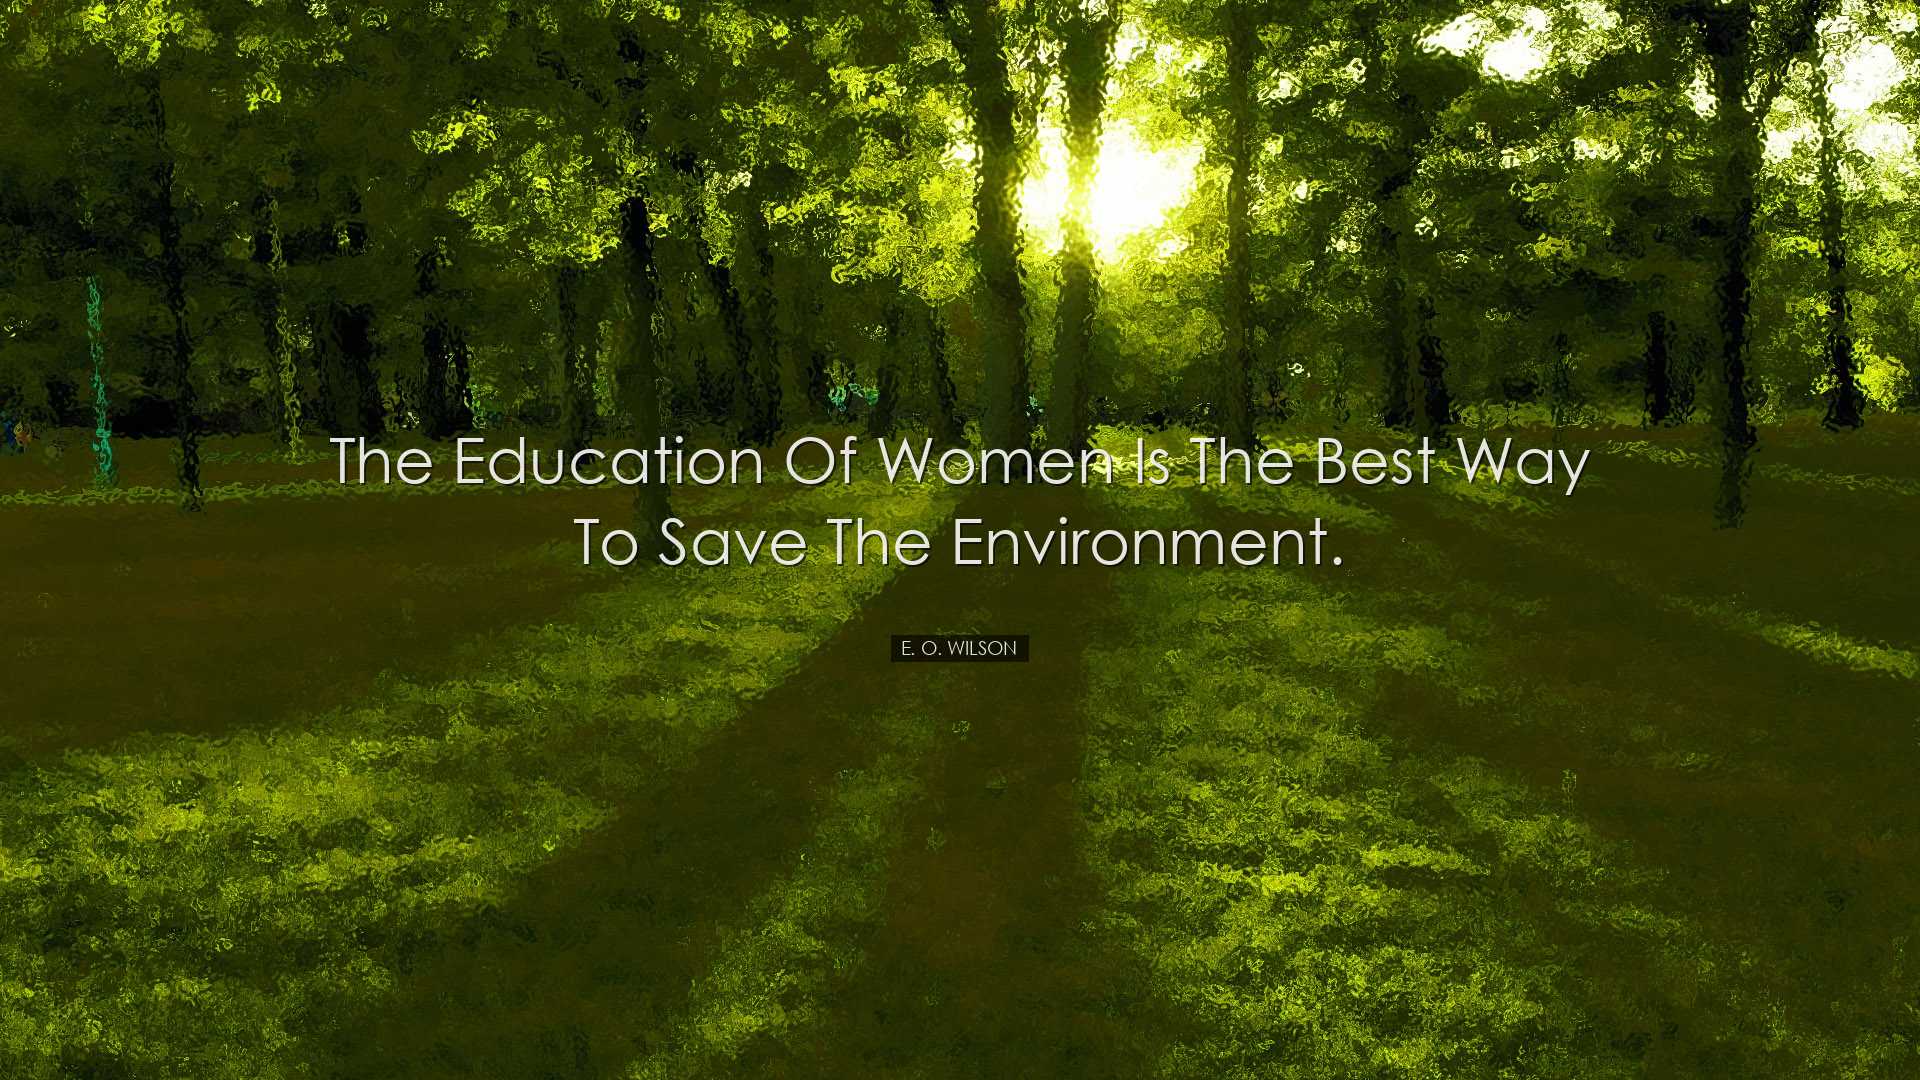 The education of women is the best way to save the environment. -